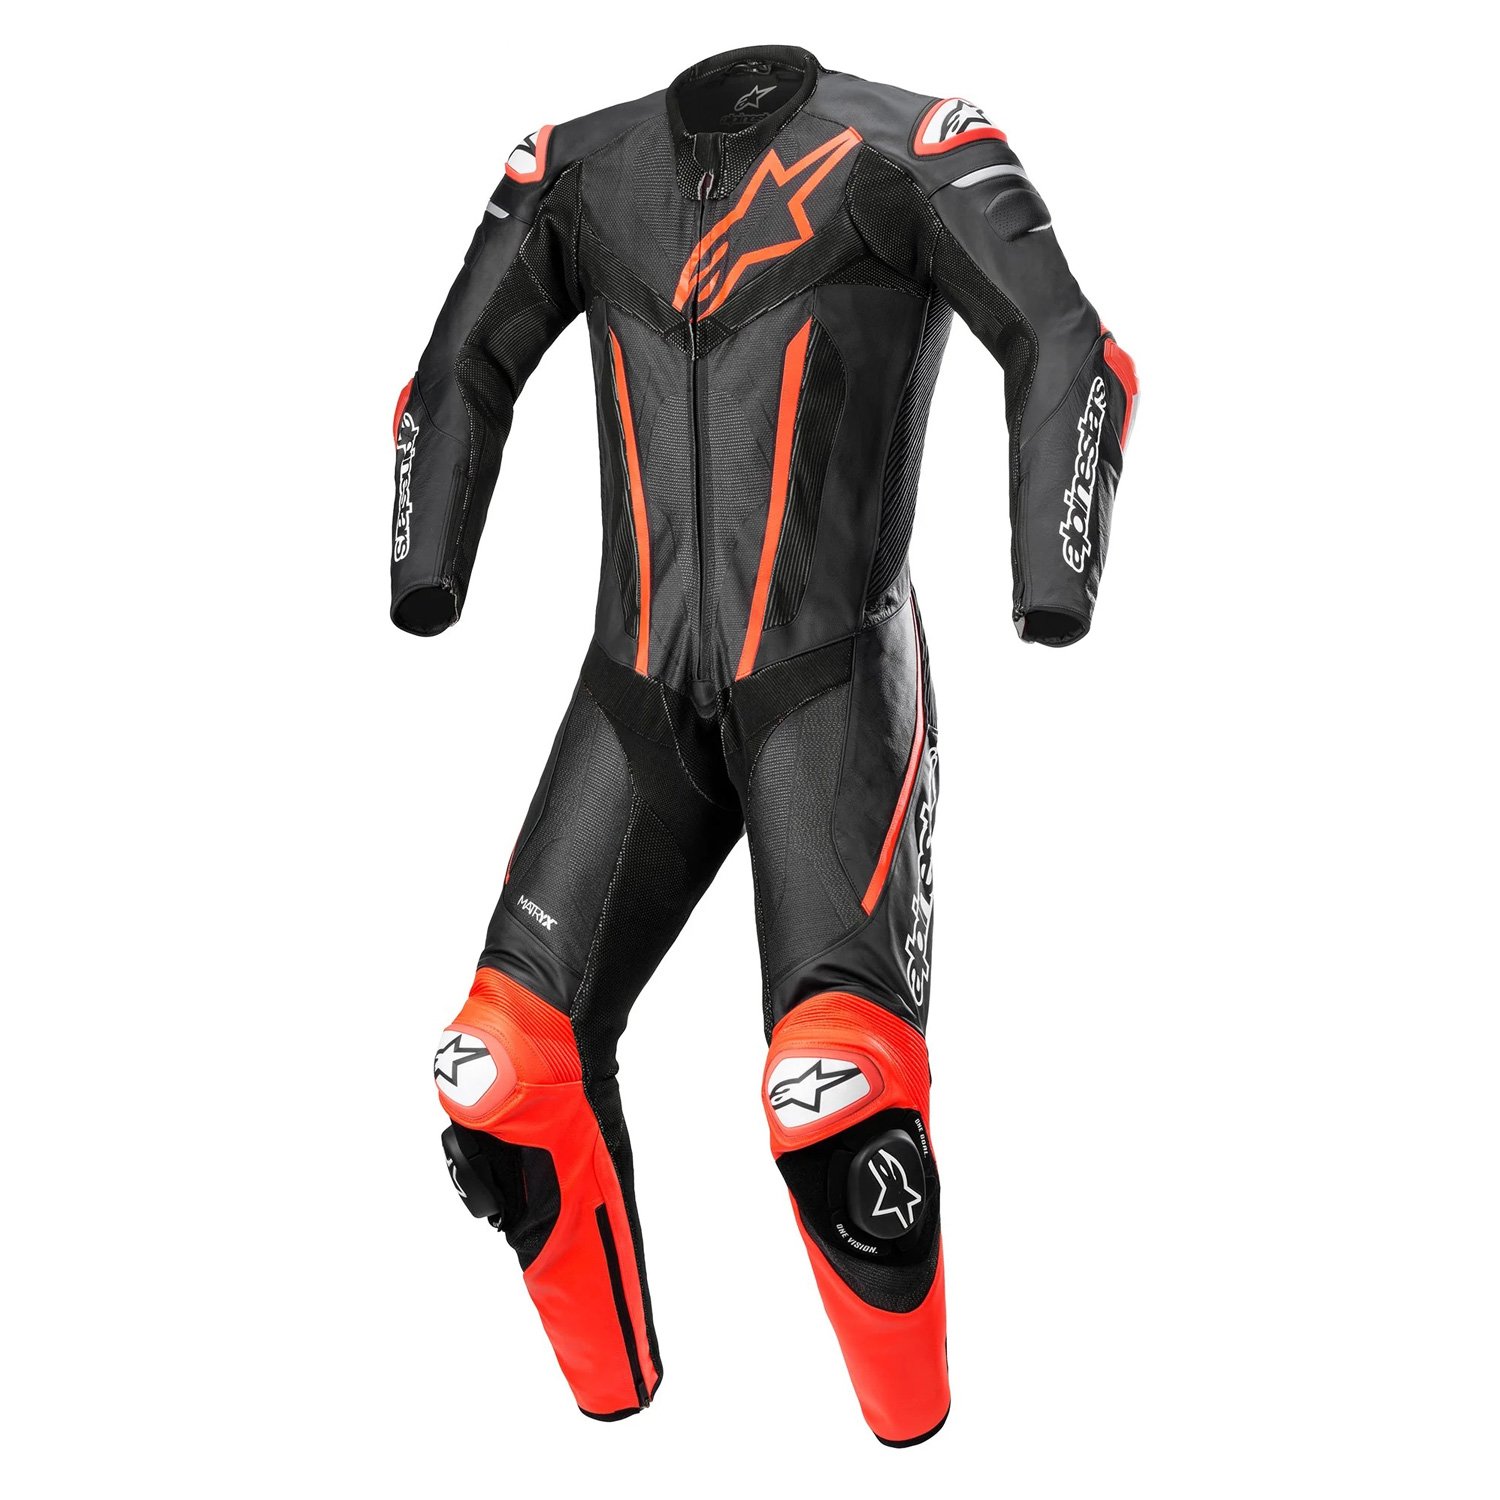 Image of Alpinestars Fusion Leather One Piece Suit Black Red Fluo Size 52 ID 8059175889424